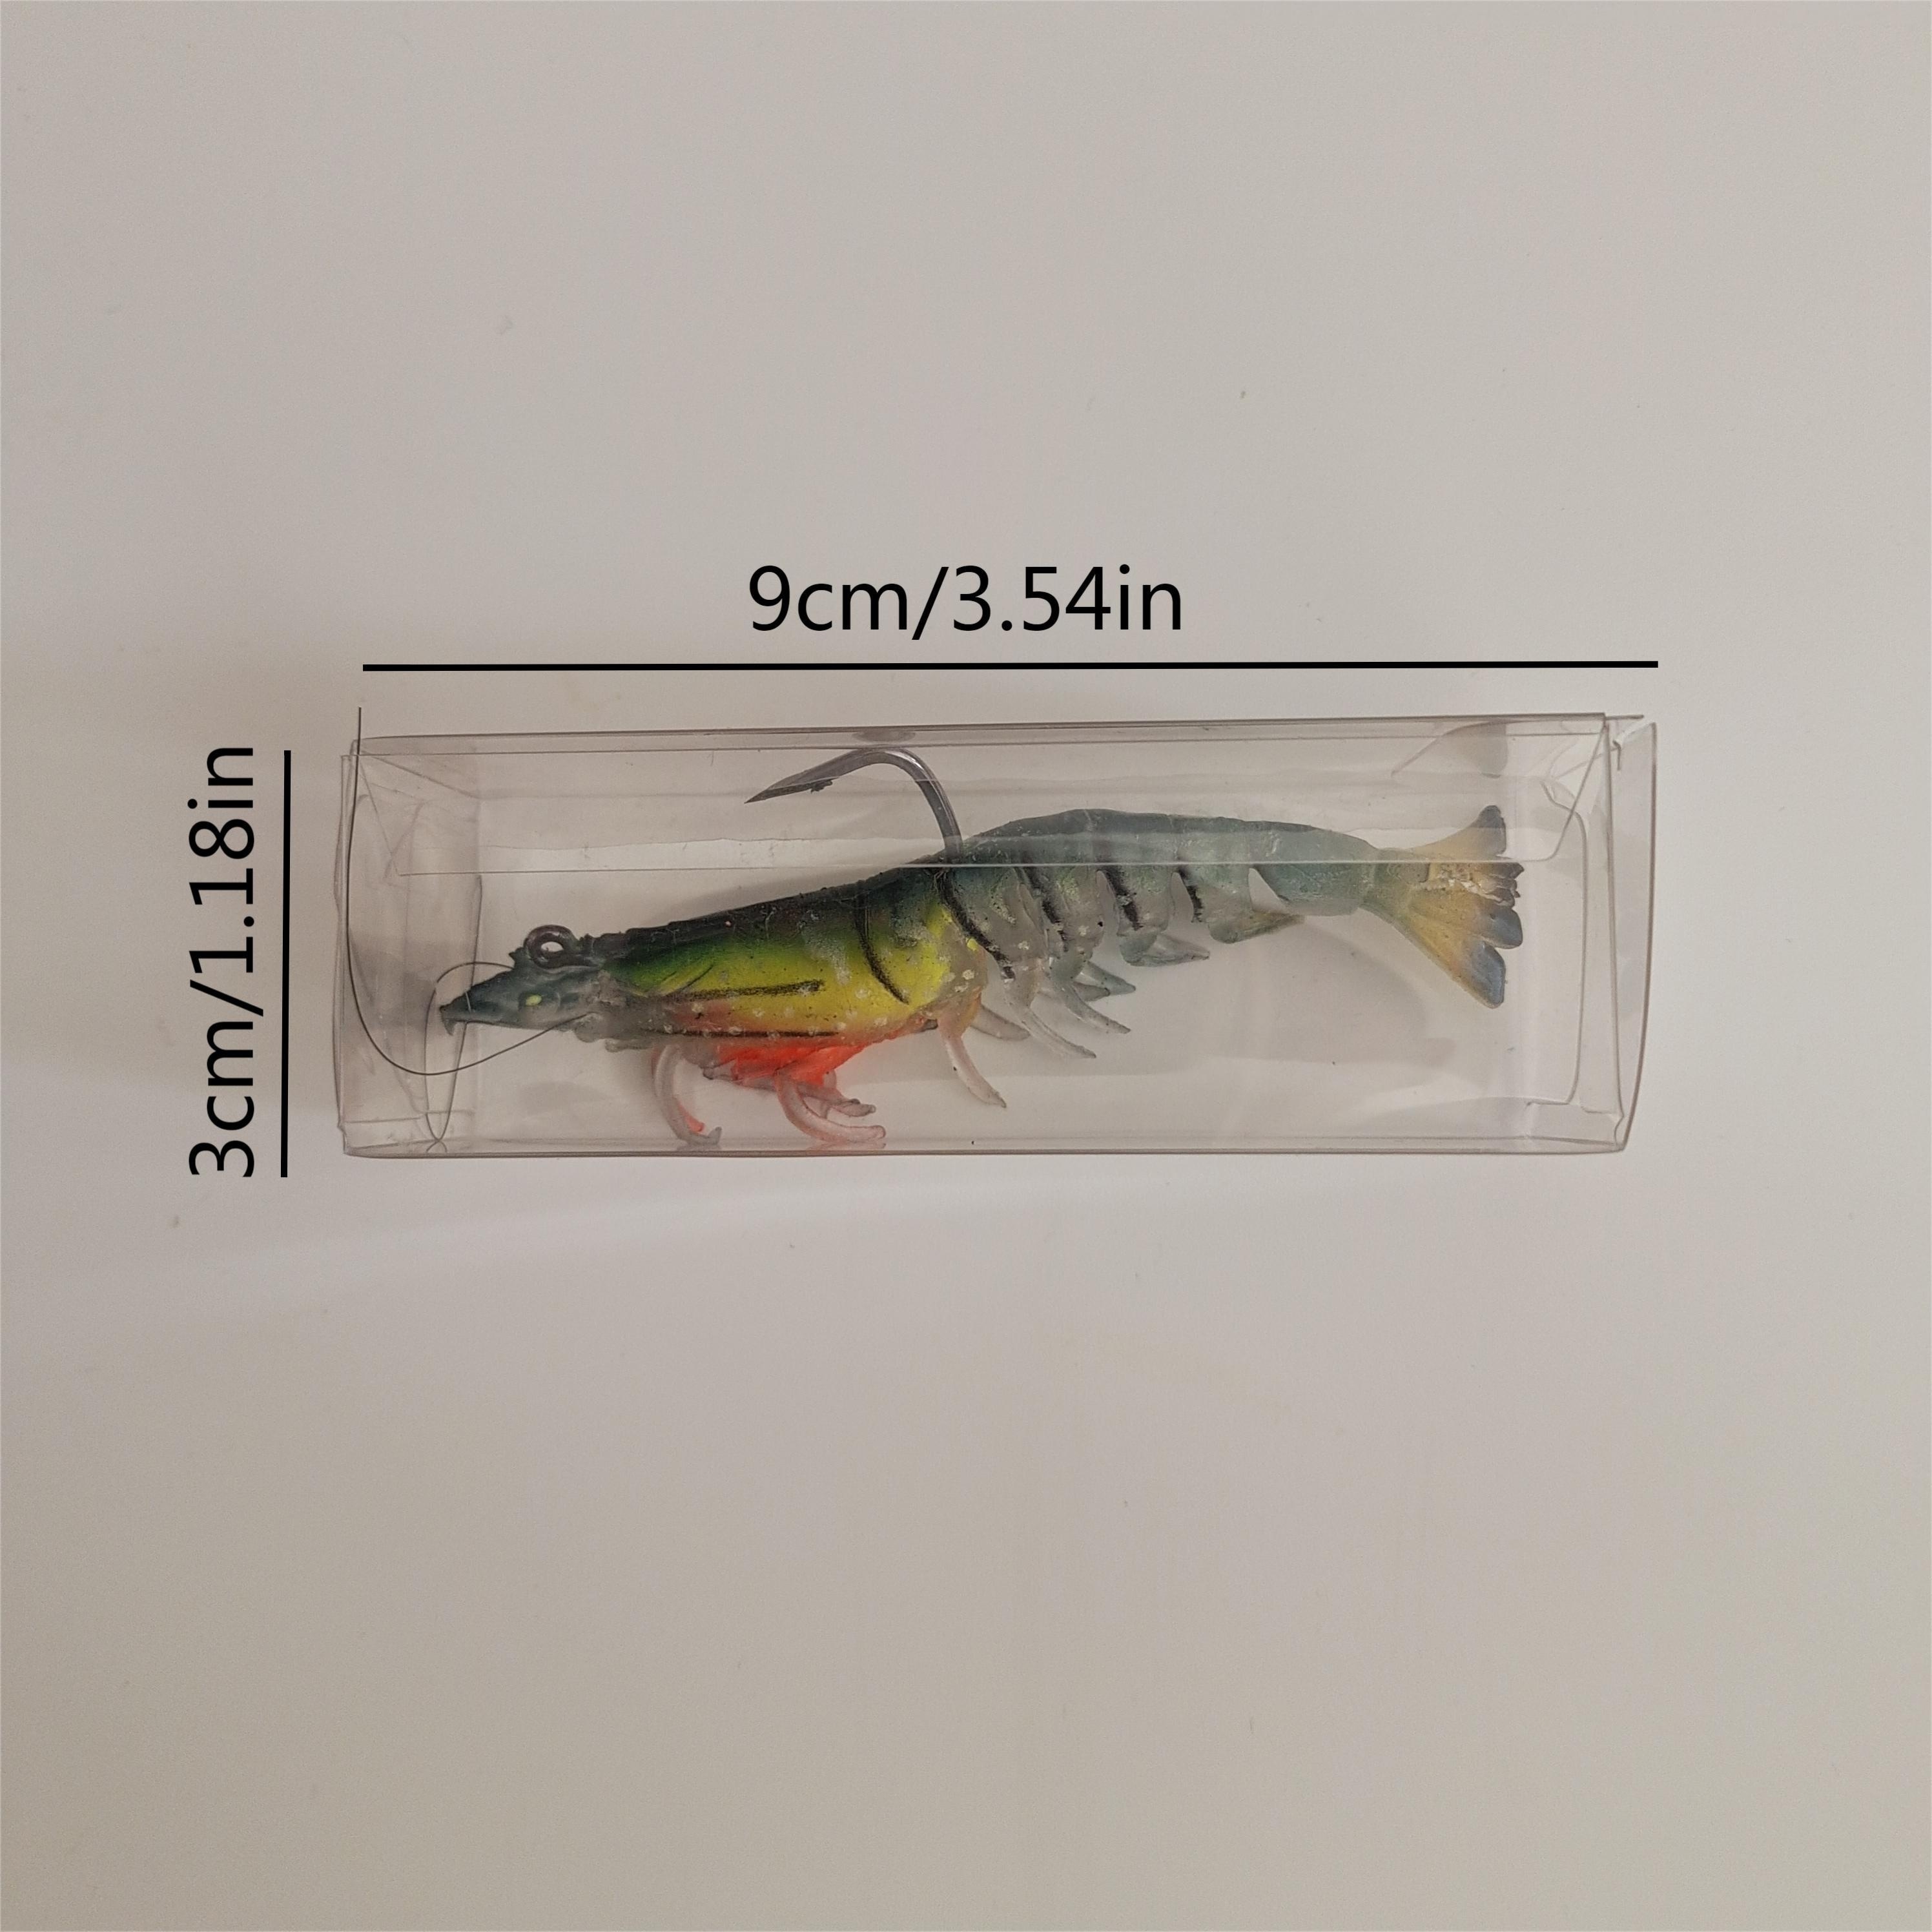 3pcs TPE Pre-Rigged Shrimp, Durable Soft Fishing Lures For Freshwater Or  Saltwater, Bass Fishing Jigs For Trout Crappie